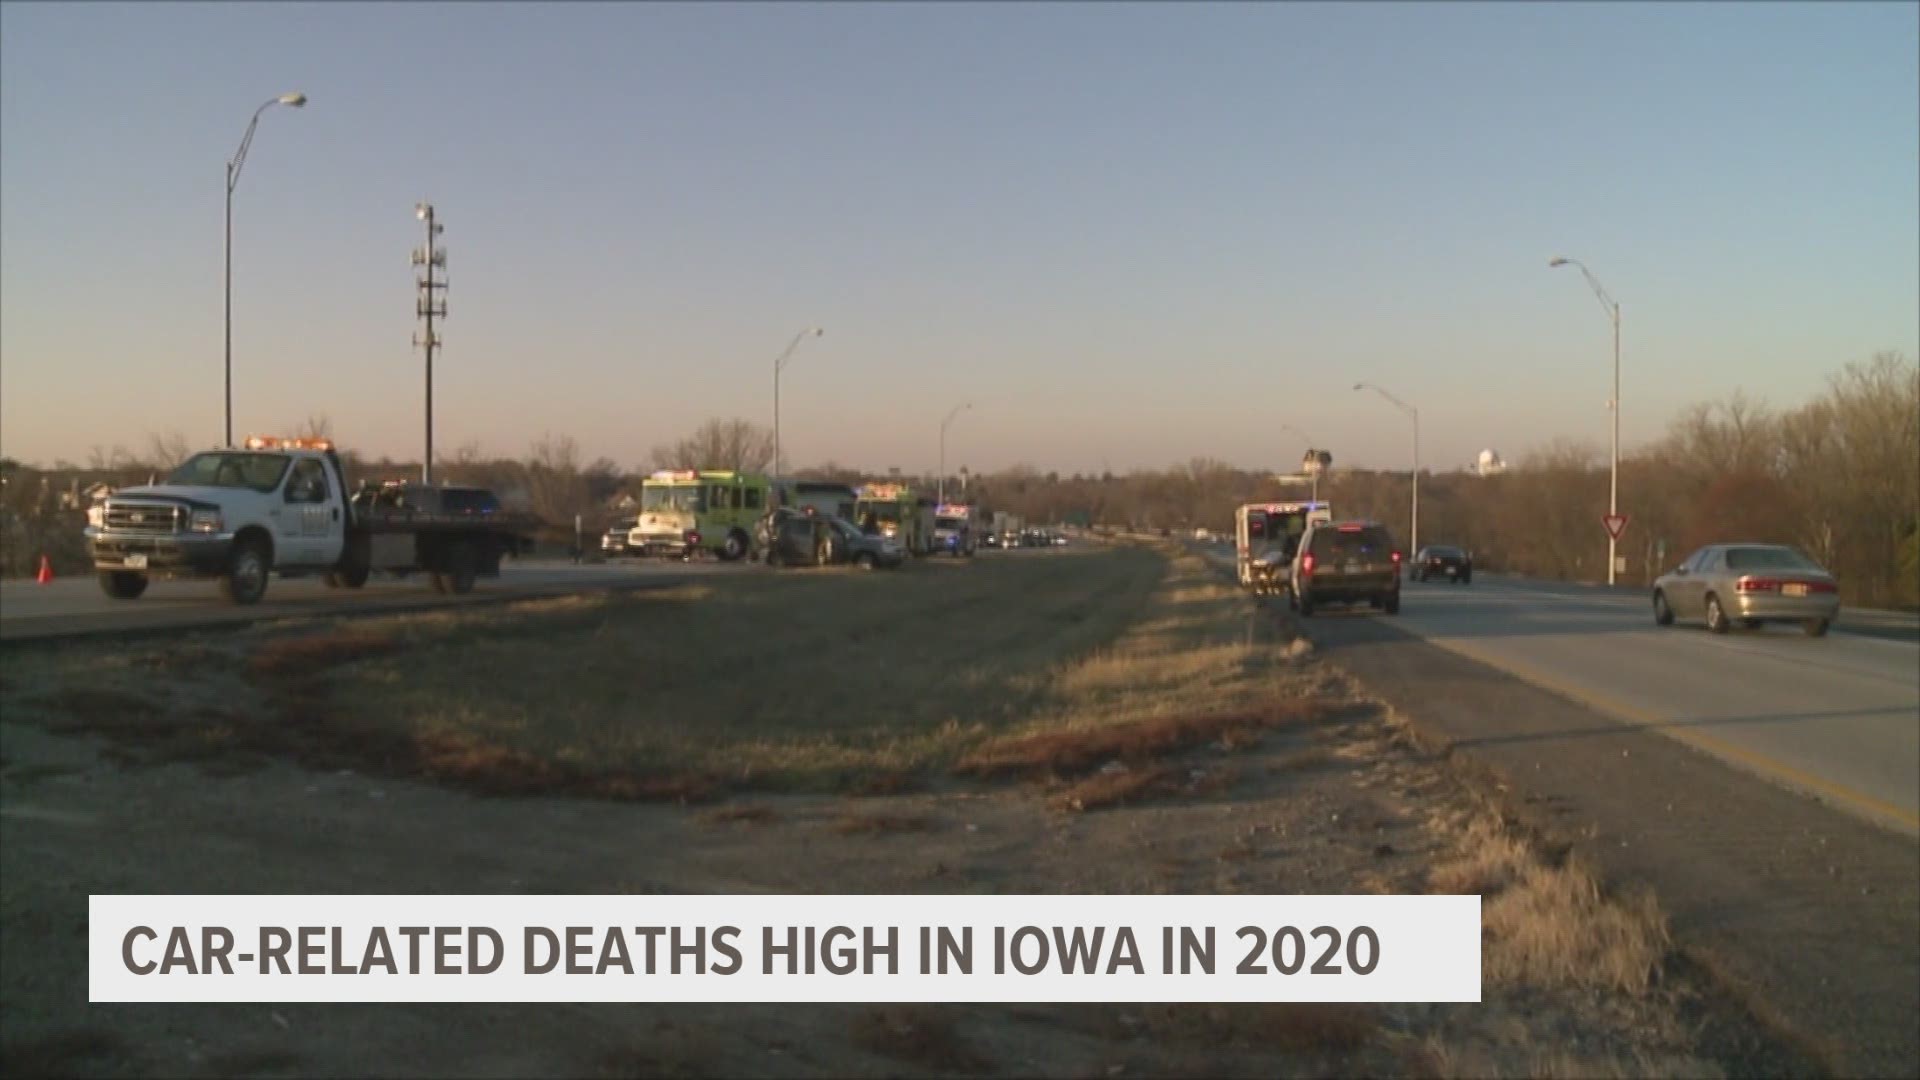 Iowa has started a new task force, involving law enforcement from the state to local levels, in order to cut down on 2021's vehicular fatalities.